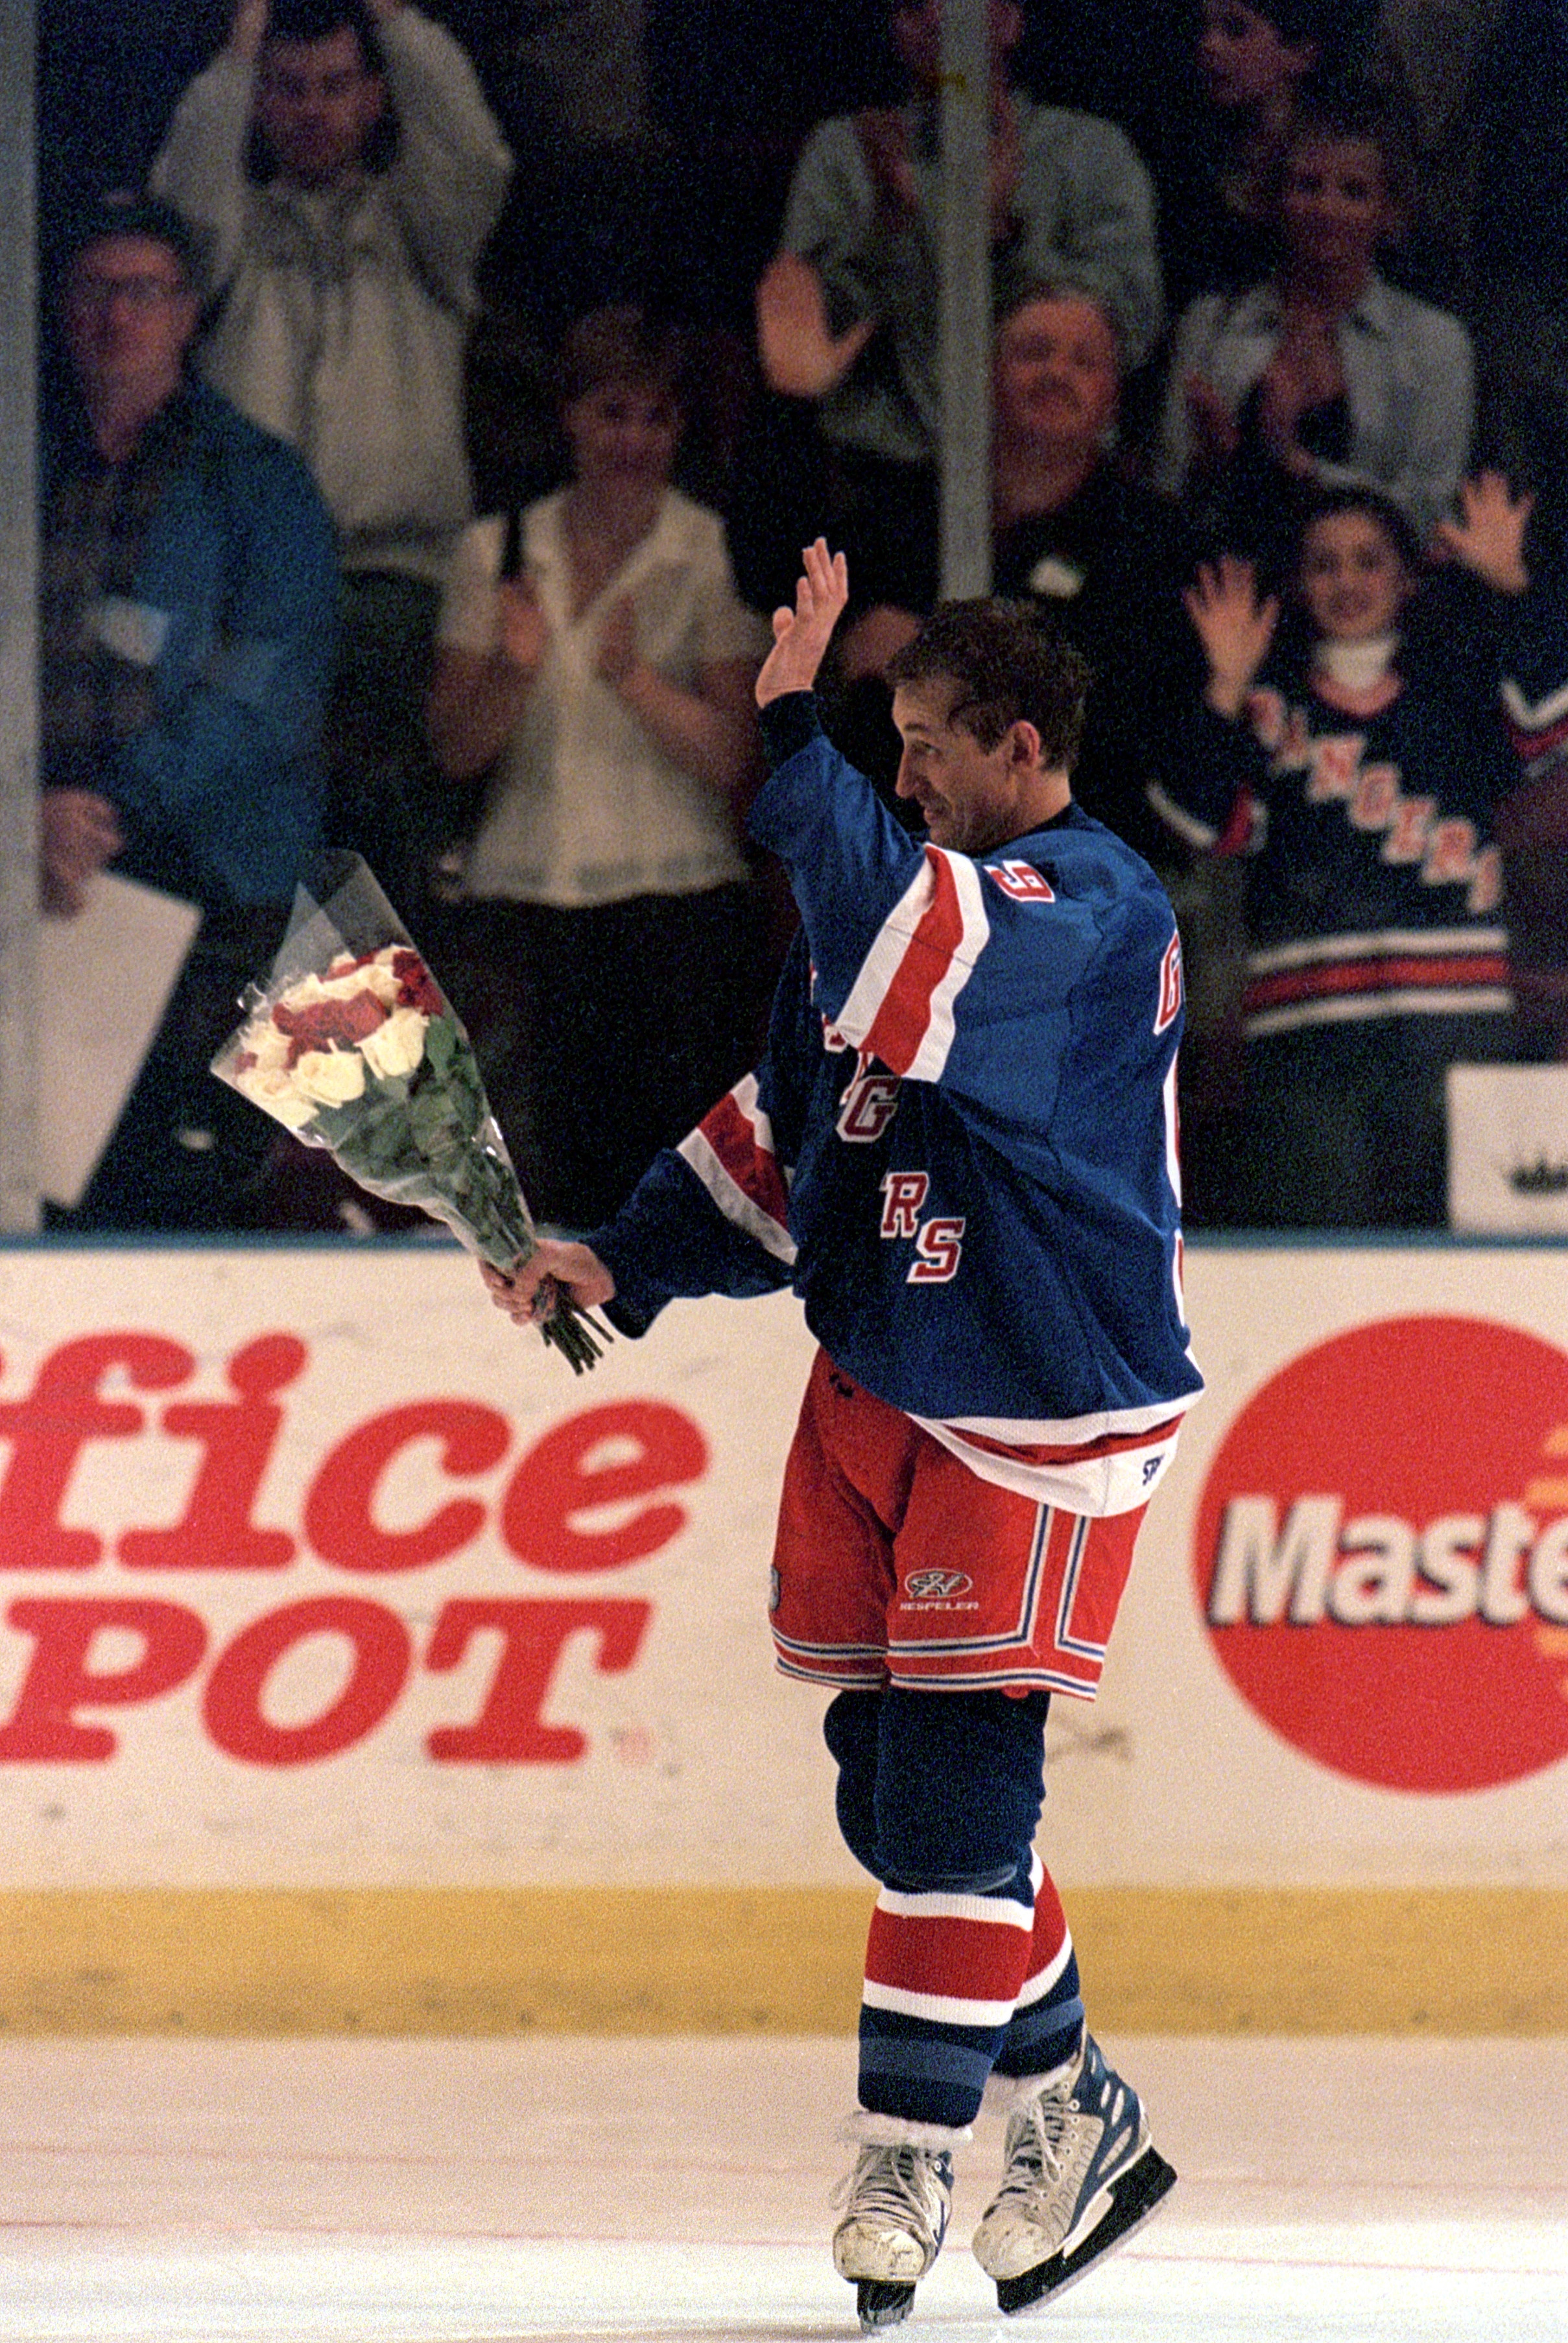 New York Rangers: The greatest game ever played